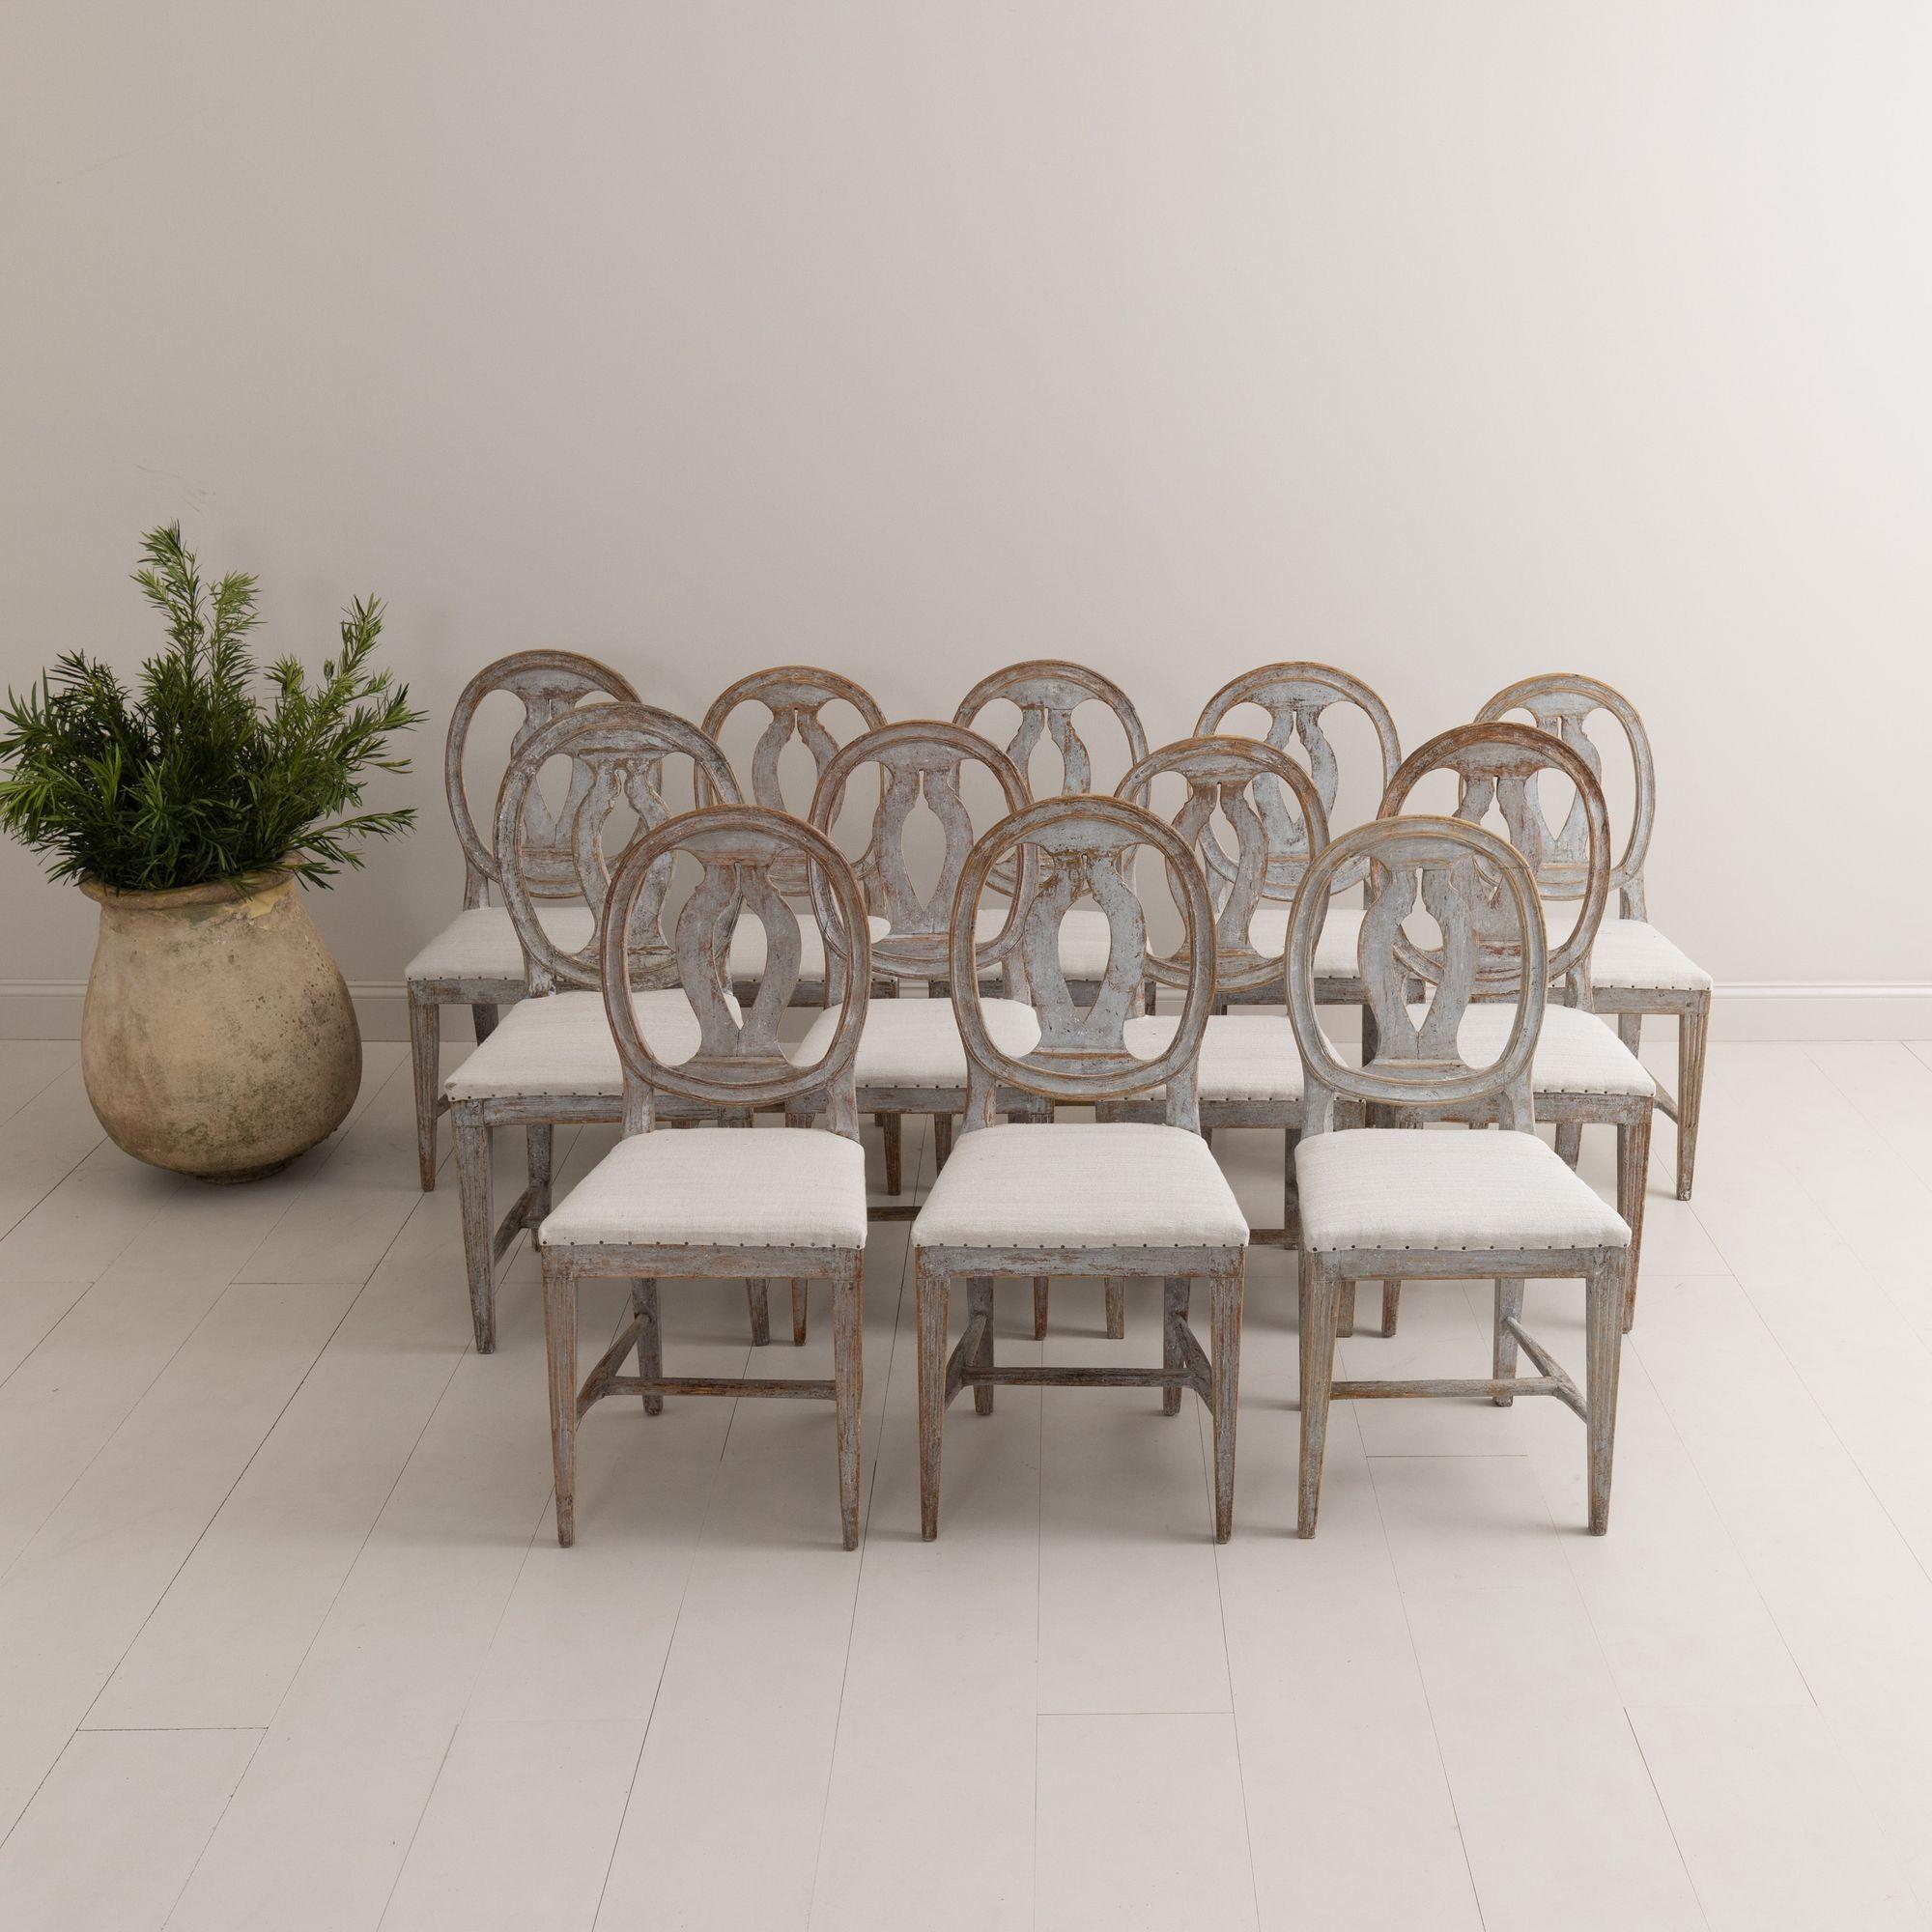 Hand-Carved 19th c. Collection of Twelve Gustavian 'Swedish Model' Chairs in Original Paint